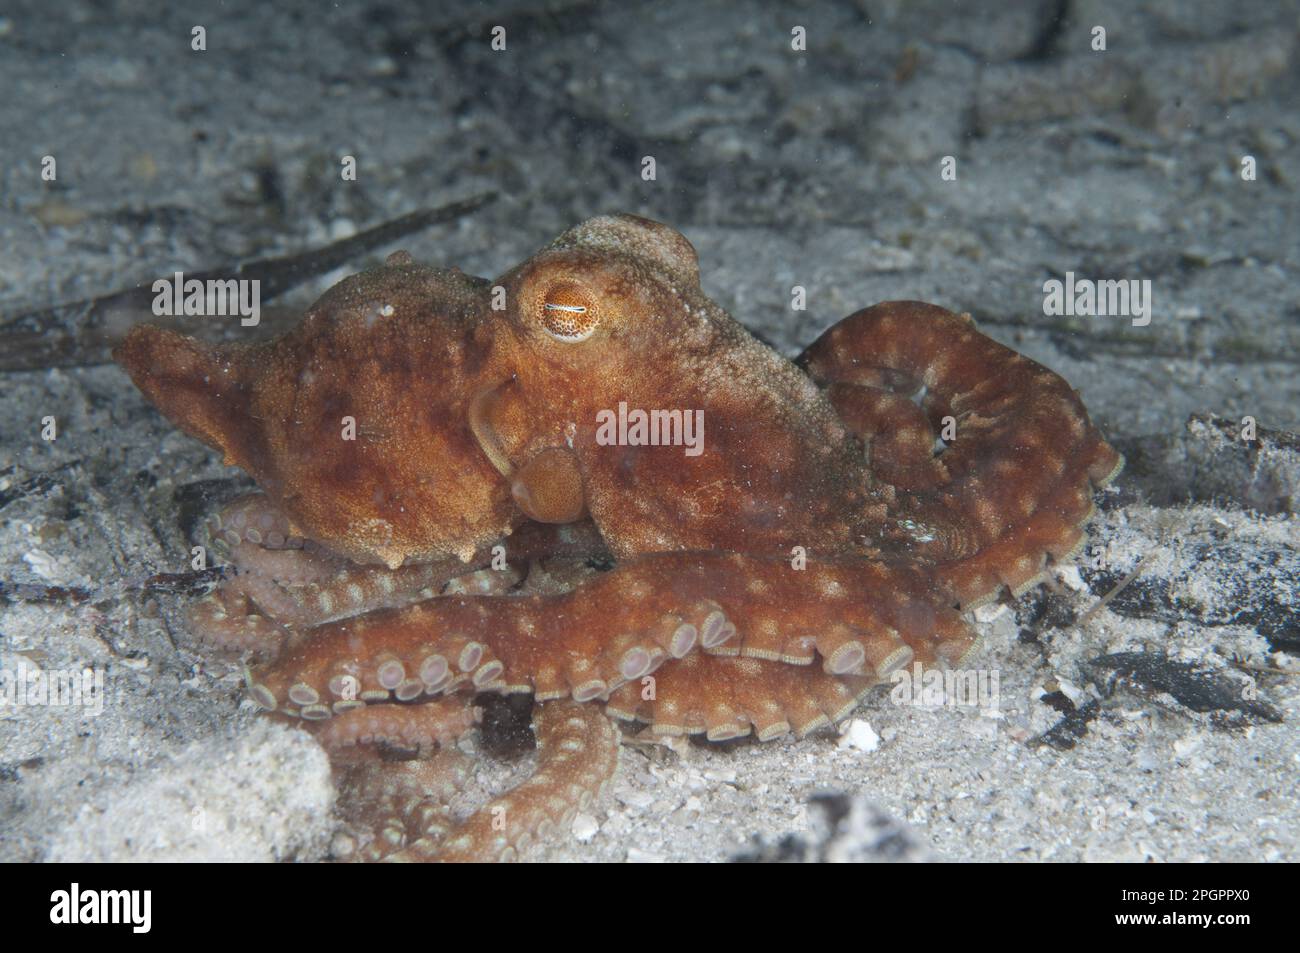 Starry night octopus (Callistoctopus luteus) adult, on the seabed at night, Gam Island, Raja Ampat, West Papua, New Guinea, Indonesia Stock Photo